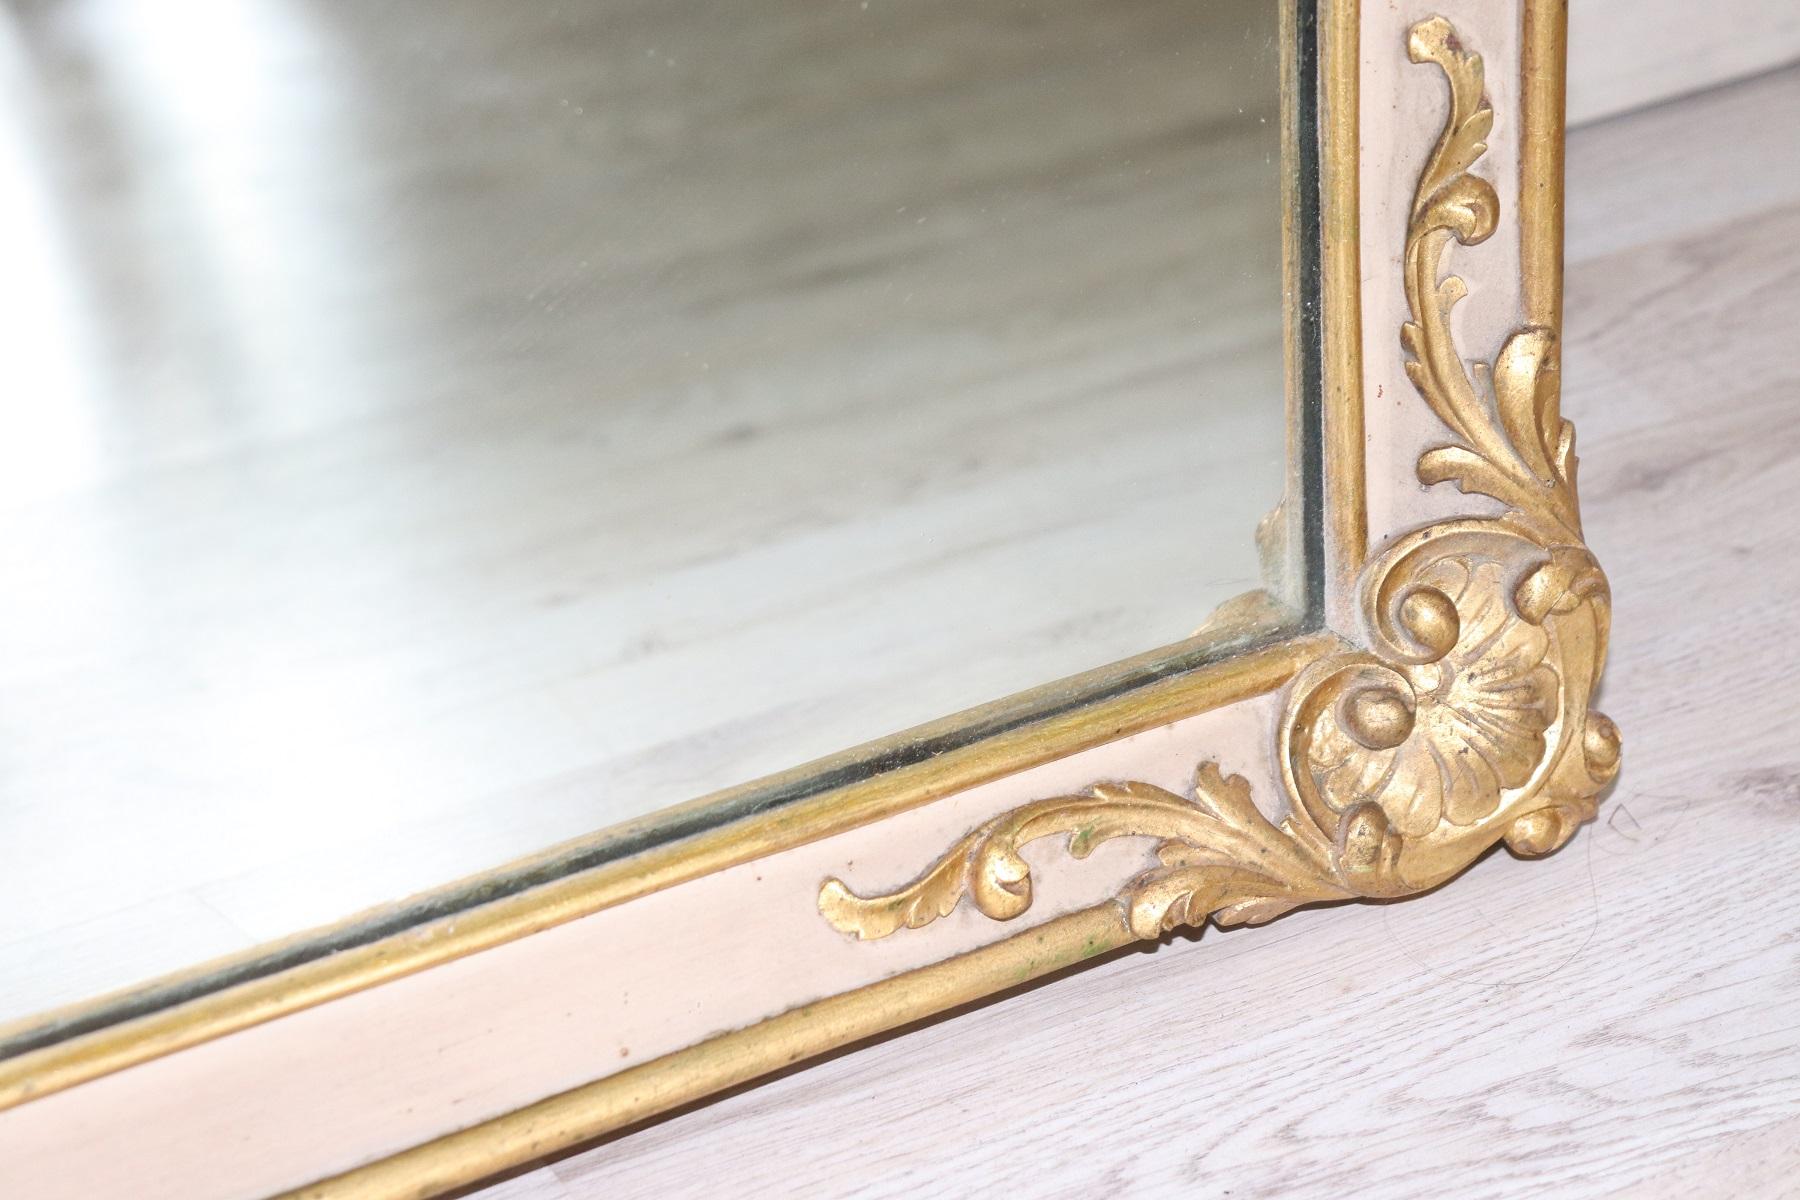 Gilt 19th Century Italian Baroque Style Lacquered and Gilded Wall Mirror